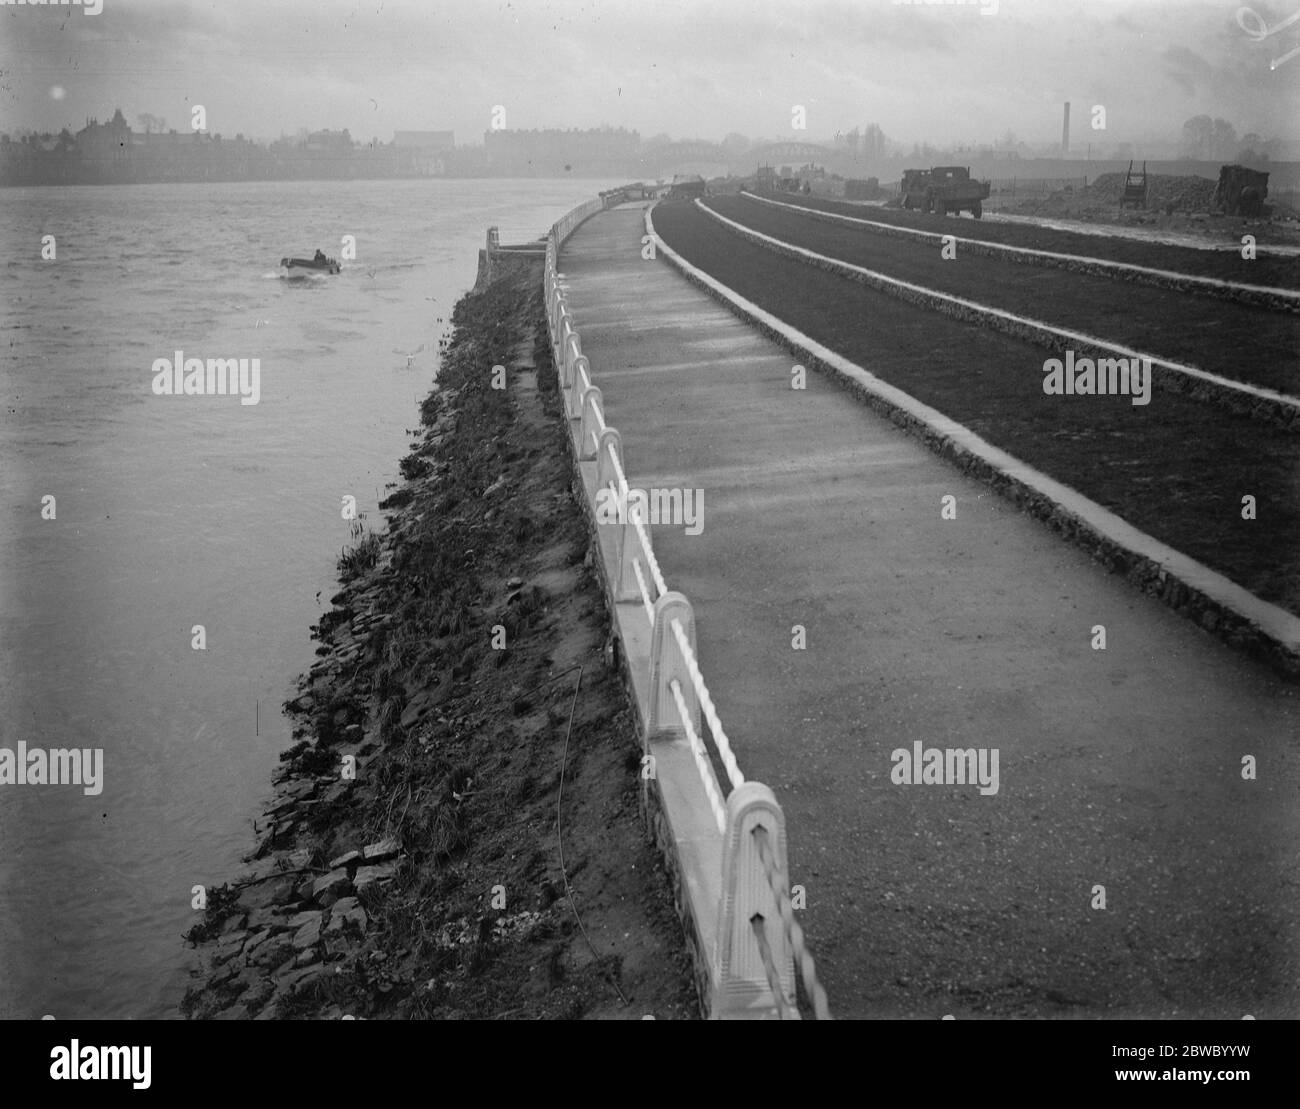 A new London promenade to accommodate 15000 persons : striking Thames riverside developments at Chiswick . A view of the terraced promenade after operations of about 12 months . 14 March 1925 Stock Photo